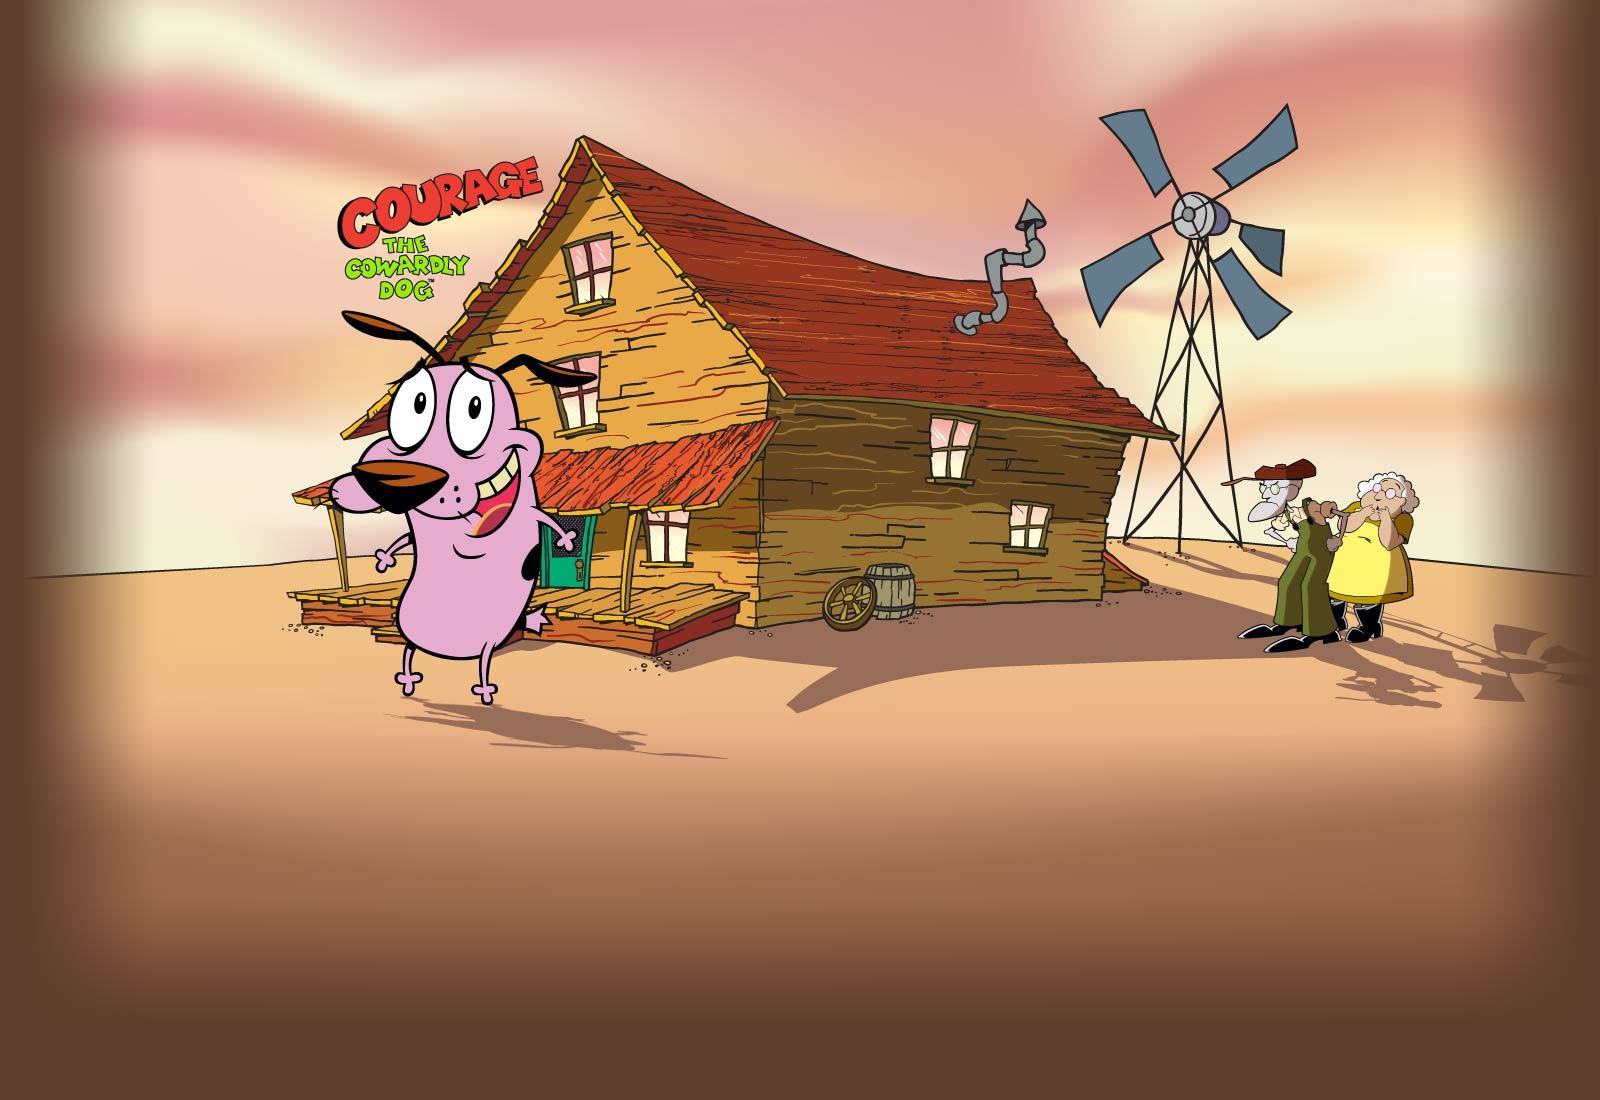 Cowardly Dog Courage The